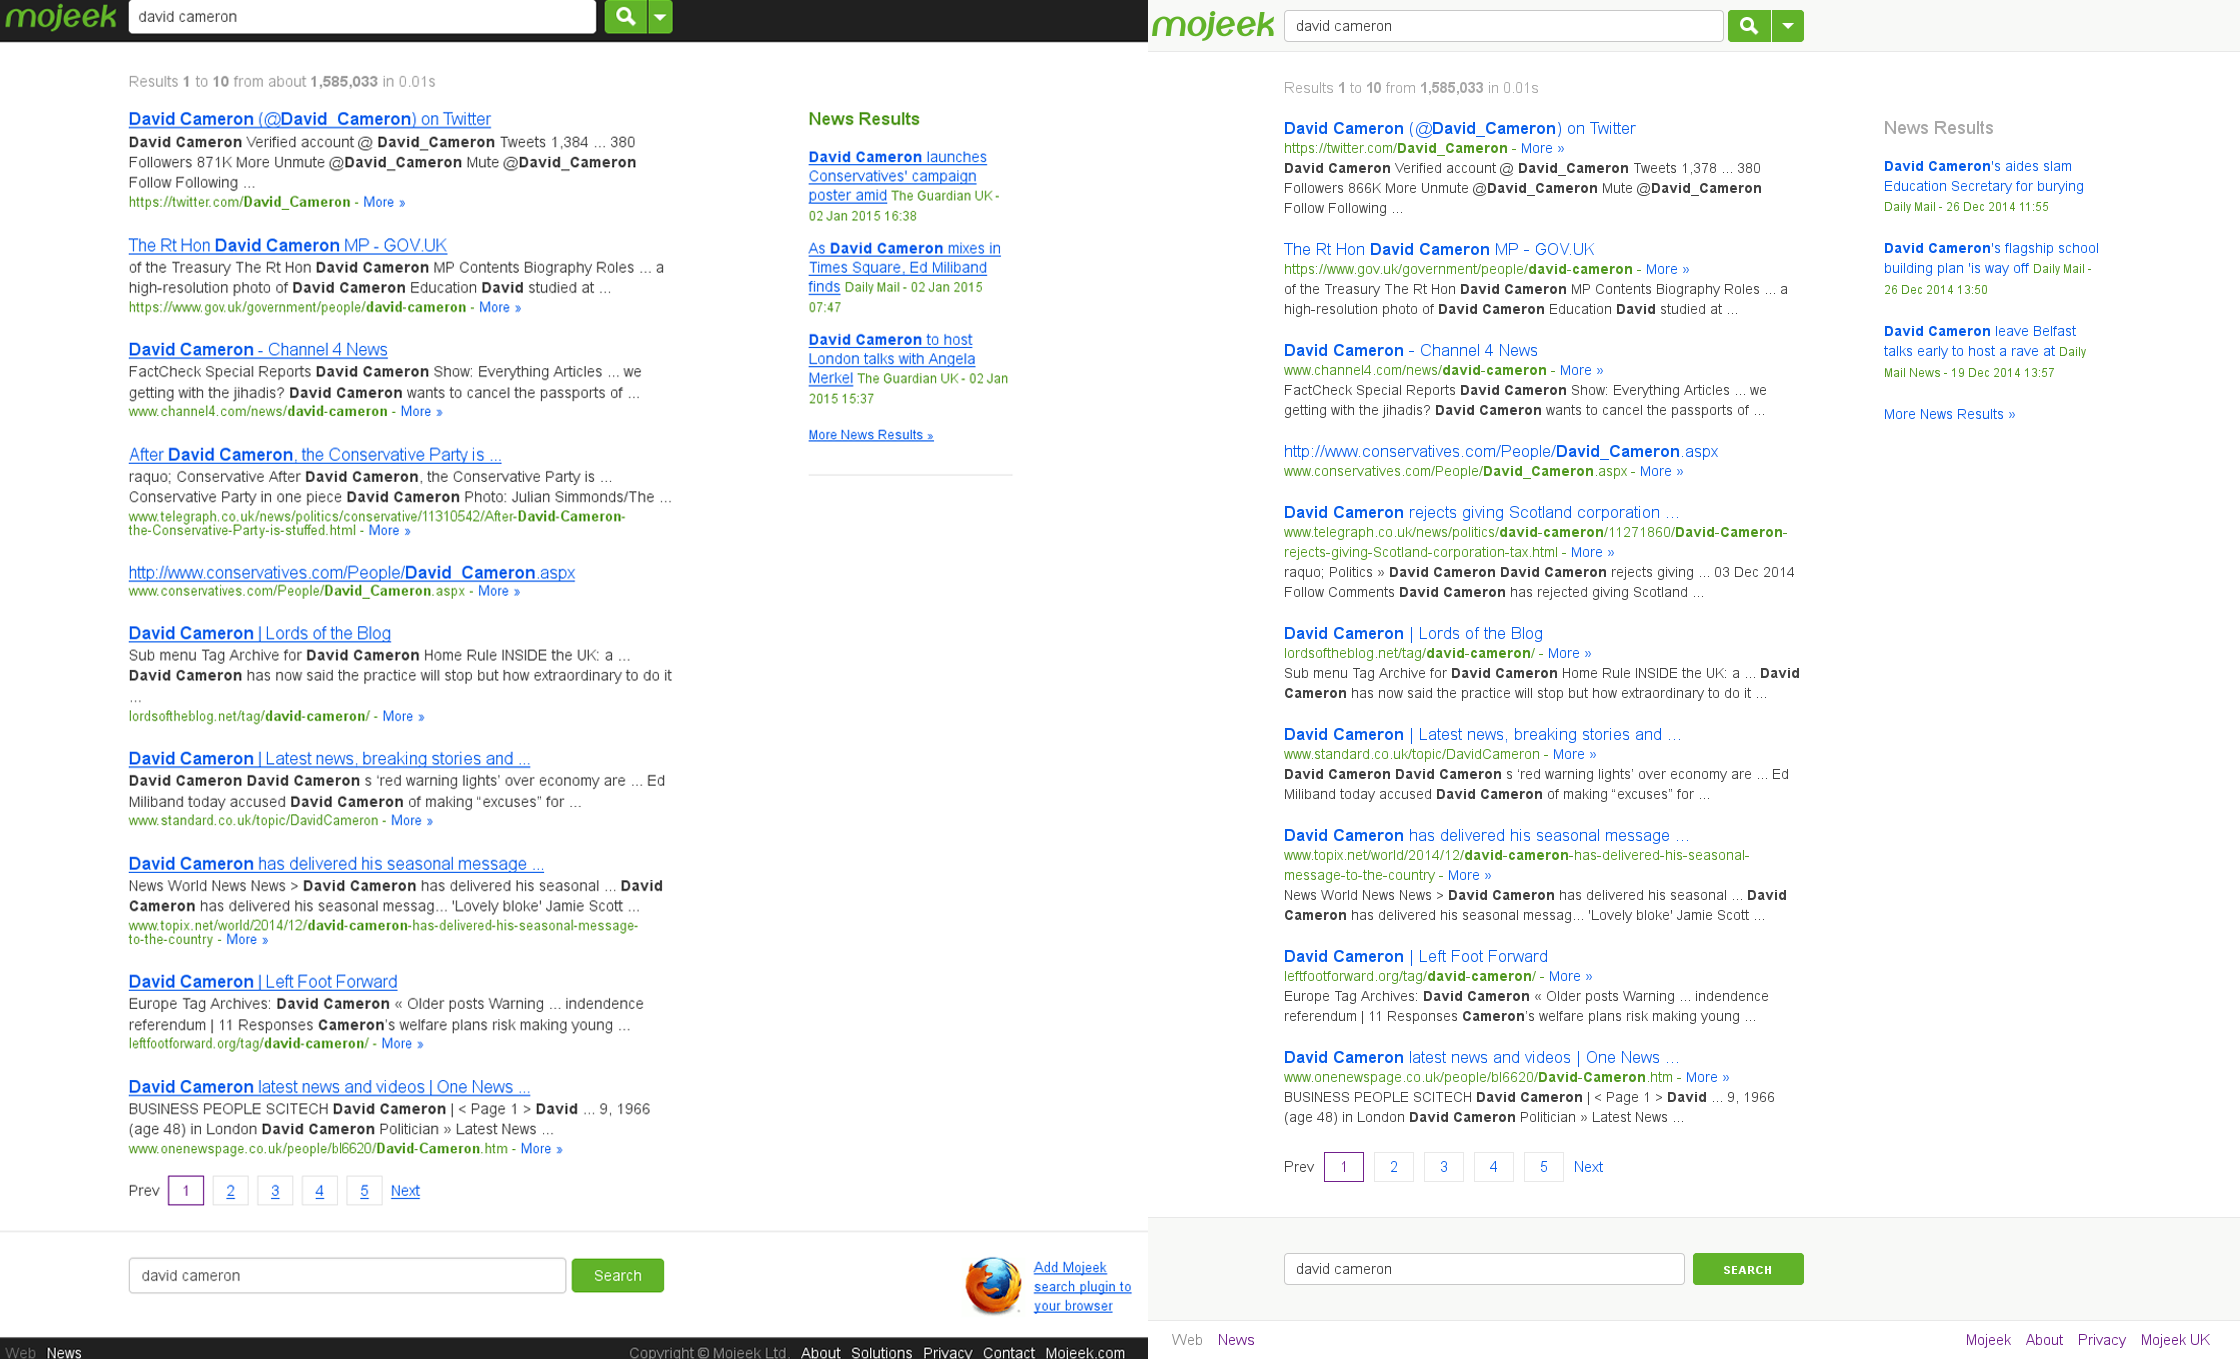 an image illustrating the changes to Mojeek's Search Engine Results Pages